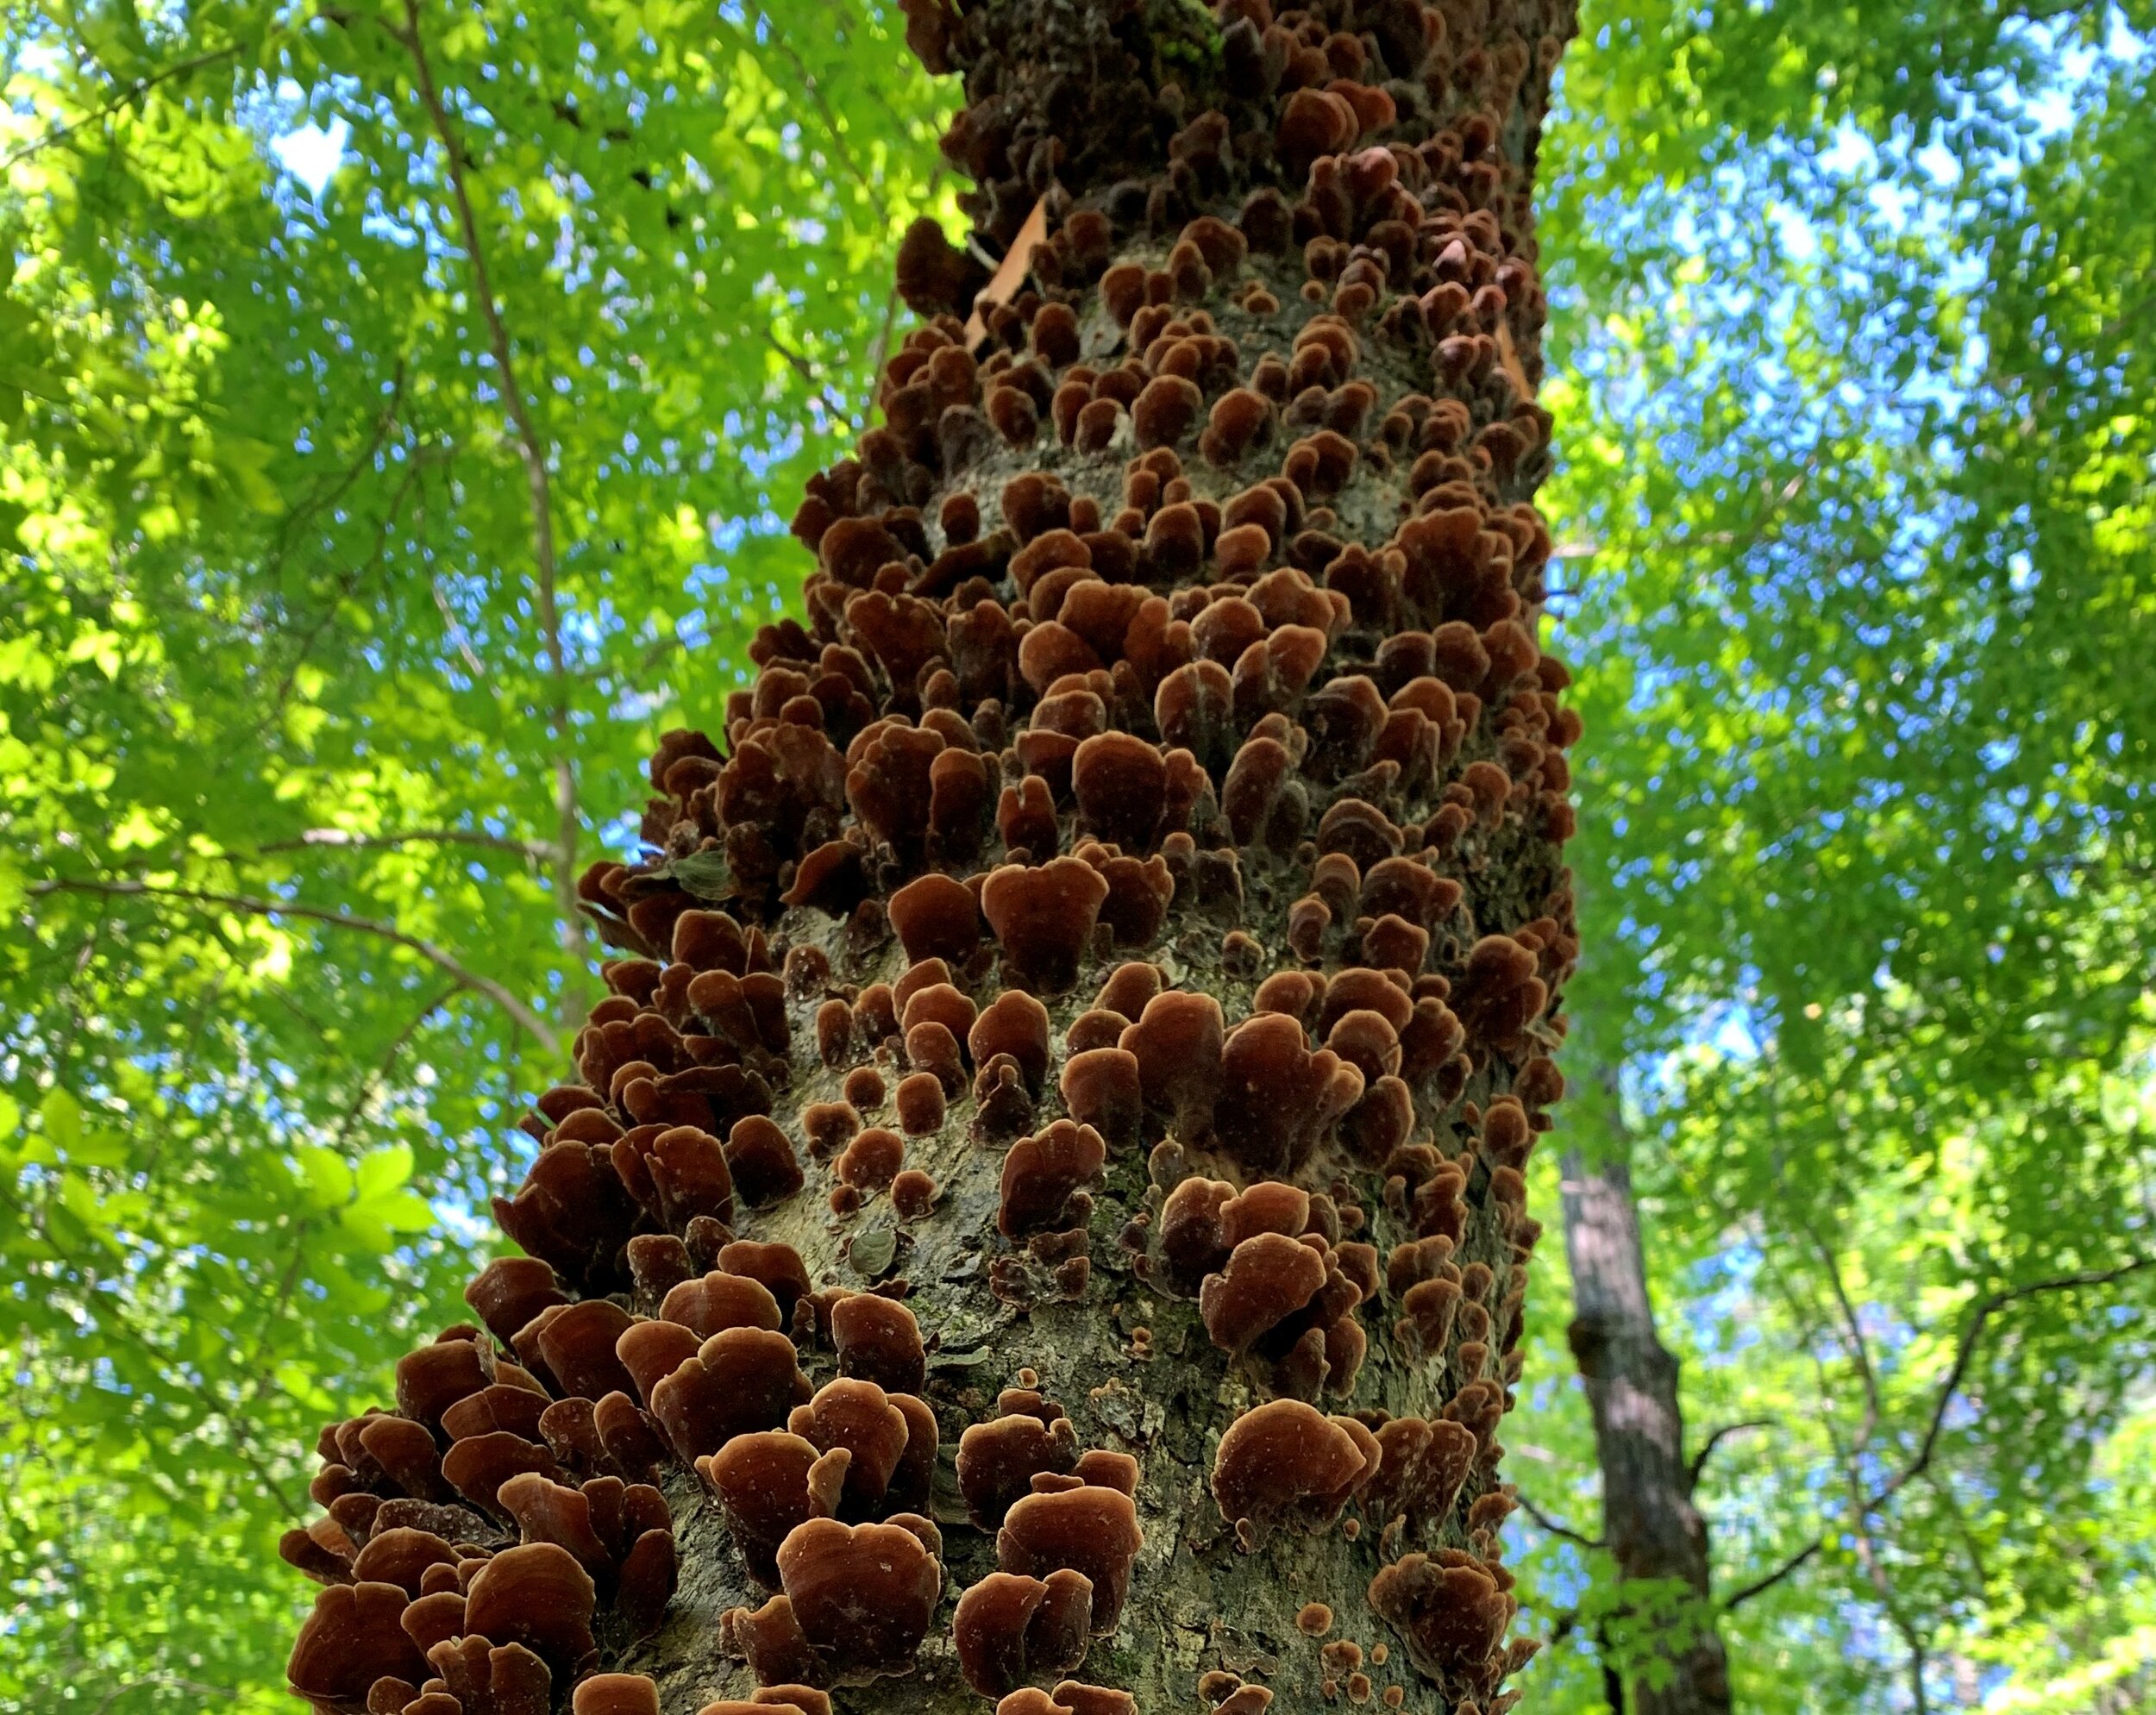  This tree fungus in Alabama was interesting to me. It typically grows on dead or dying trees and is a part of the cycle of life in the forest. The fungi themselves have rings that indicate how old they are. Some fungi are thriving at 30-50 years old